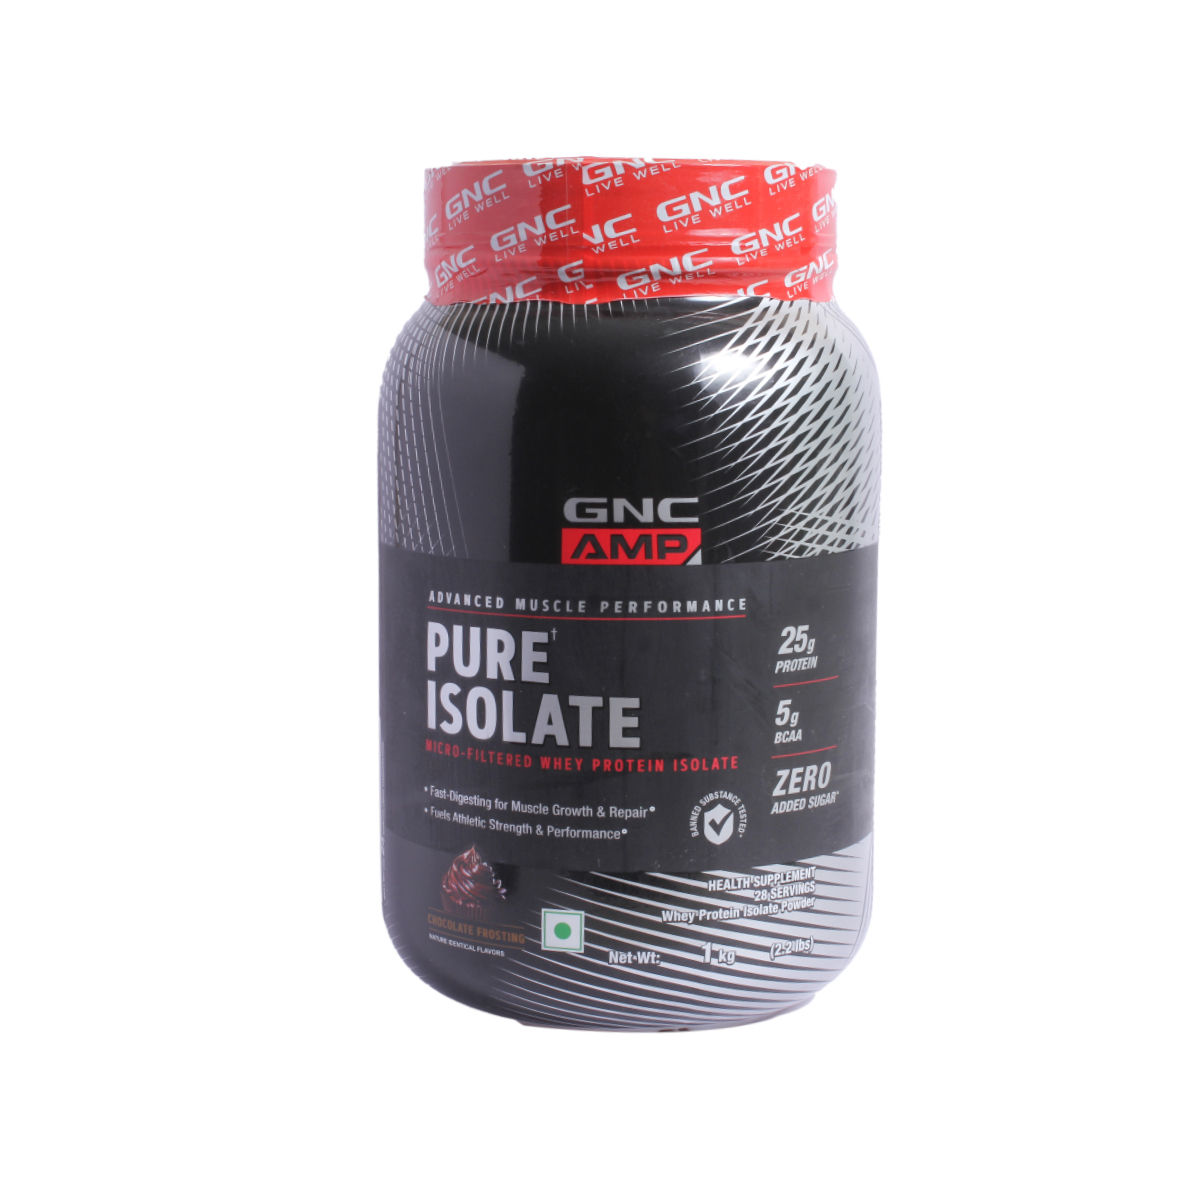 Buy GNC AMP Pure Isolate Whey Protein Chocolate Frosting Flavoured Powder, 1 kg Online